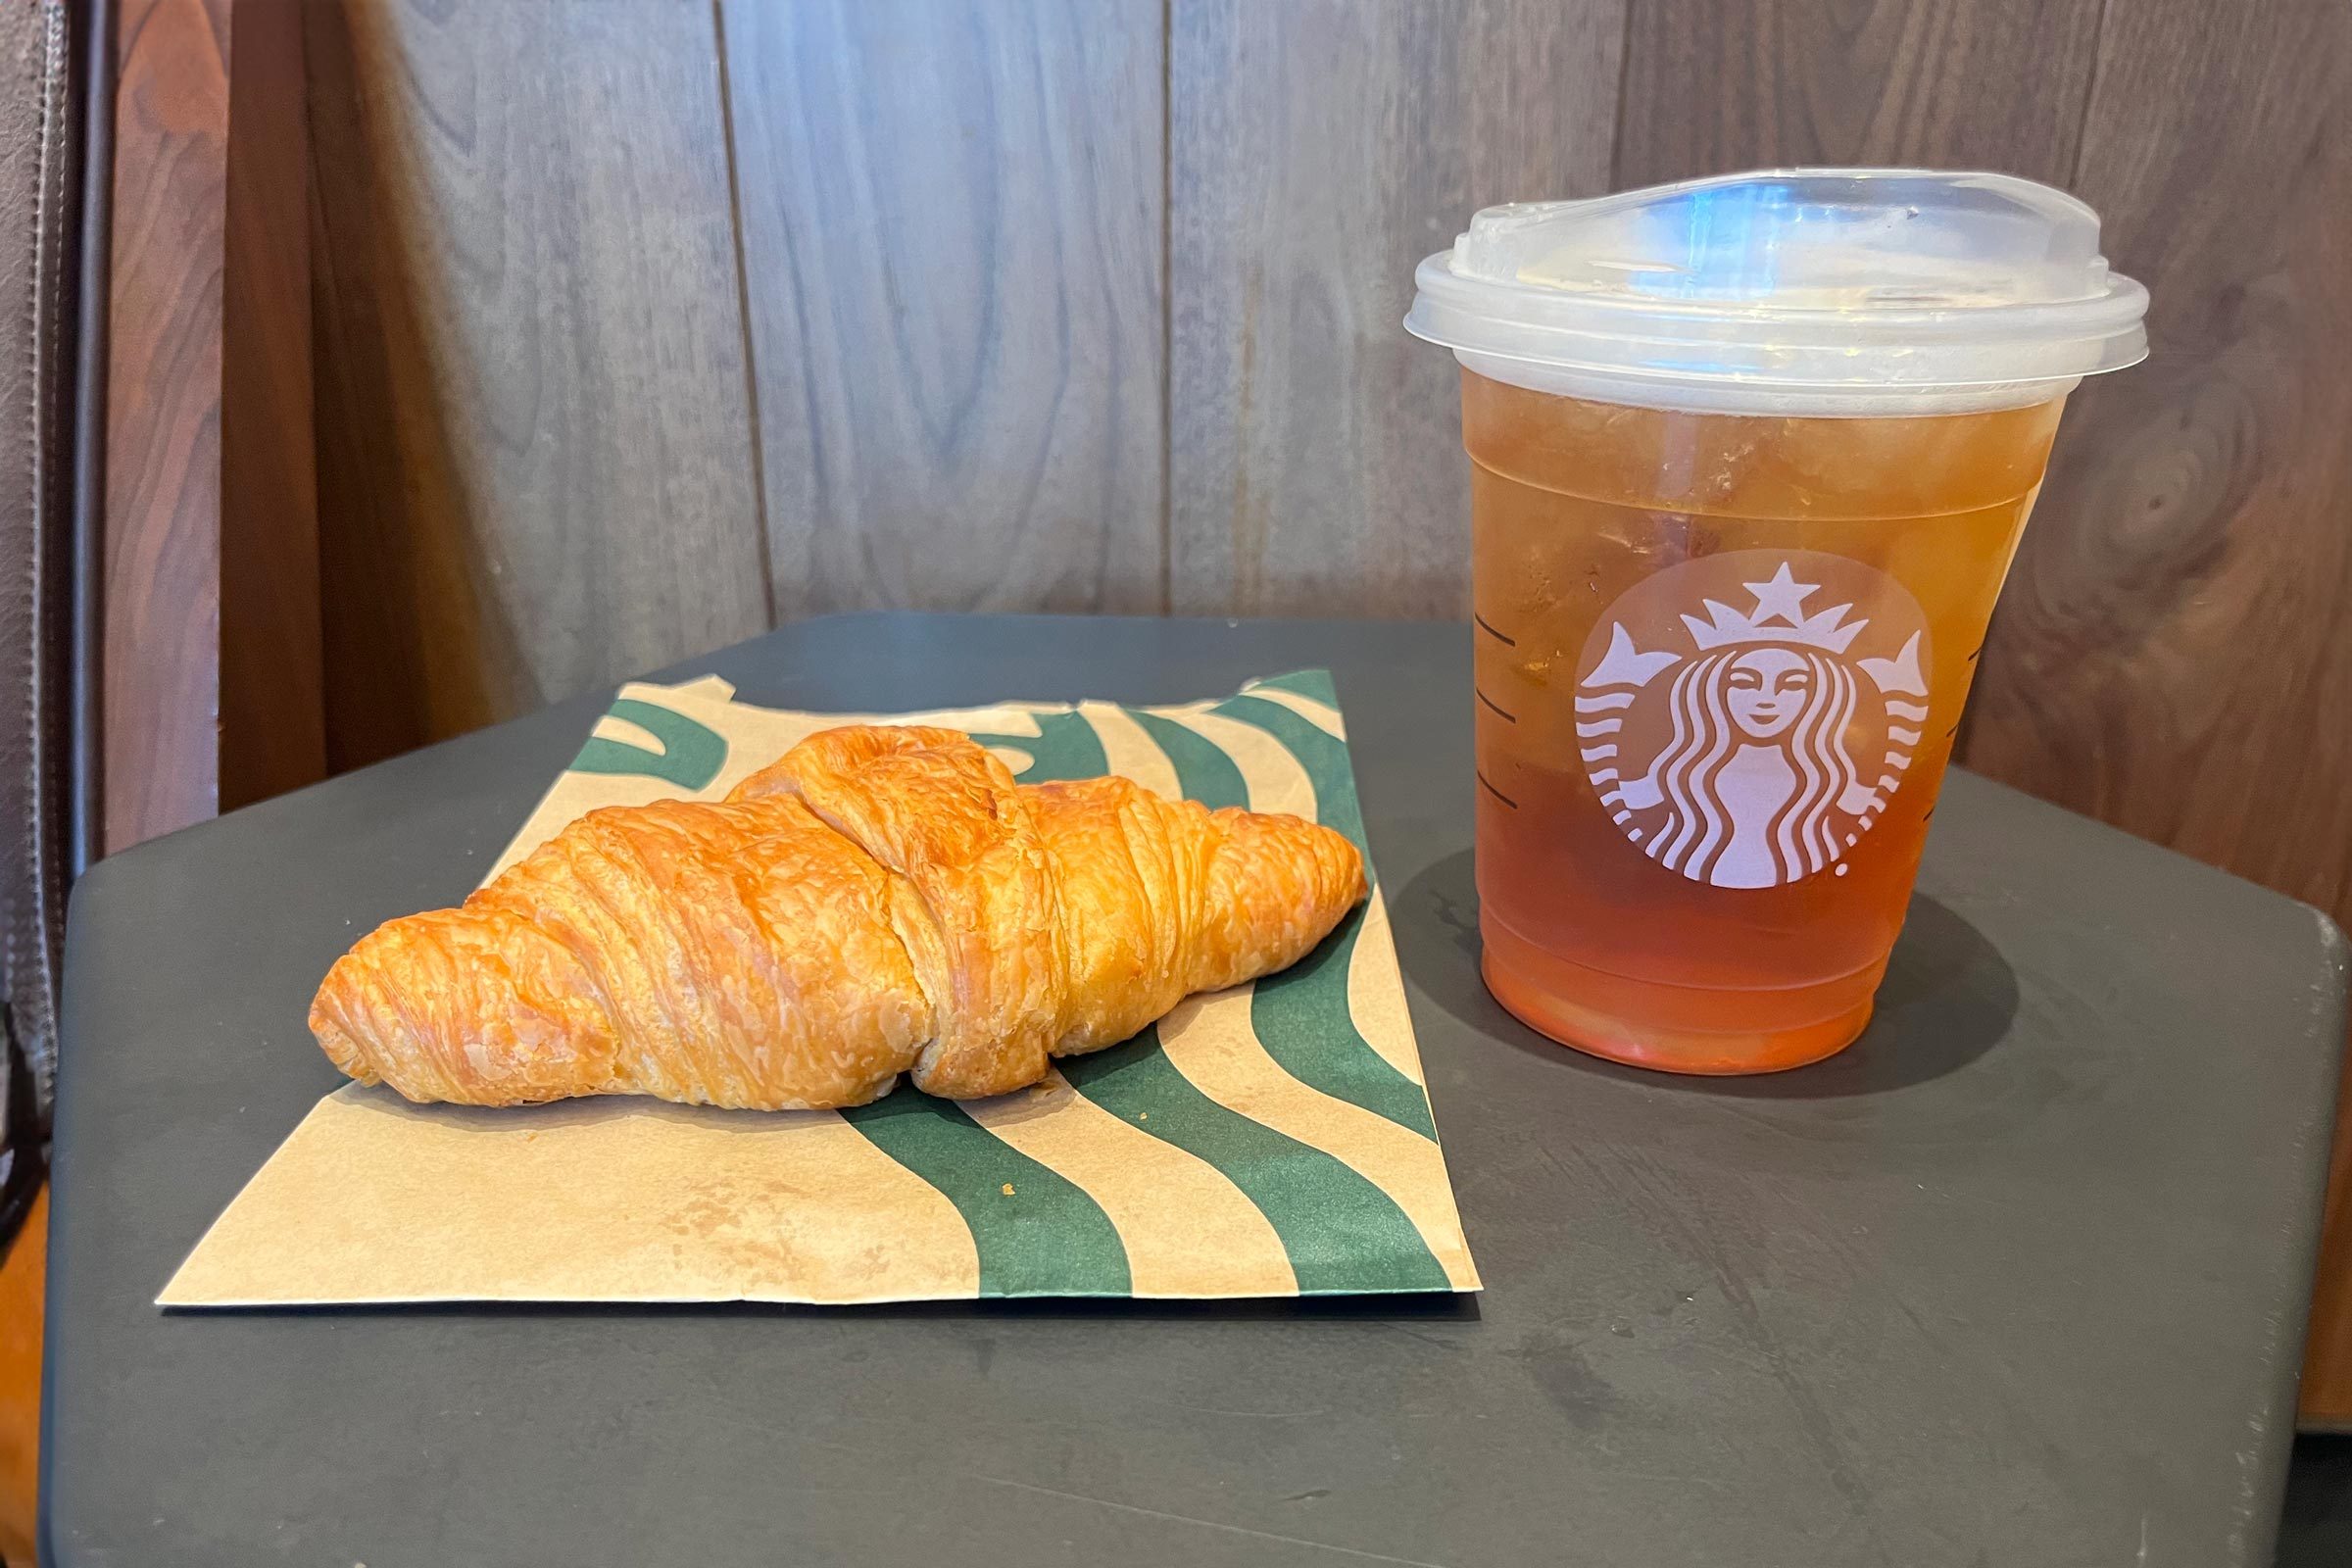 Tea and Croissant from starbucks